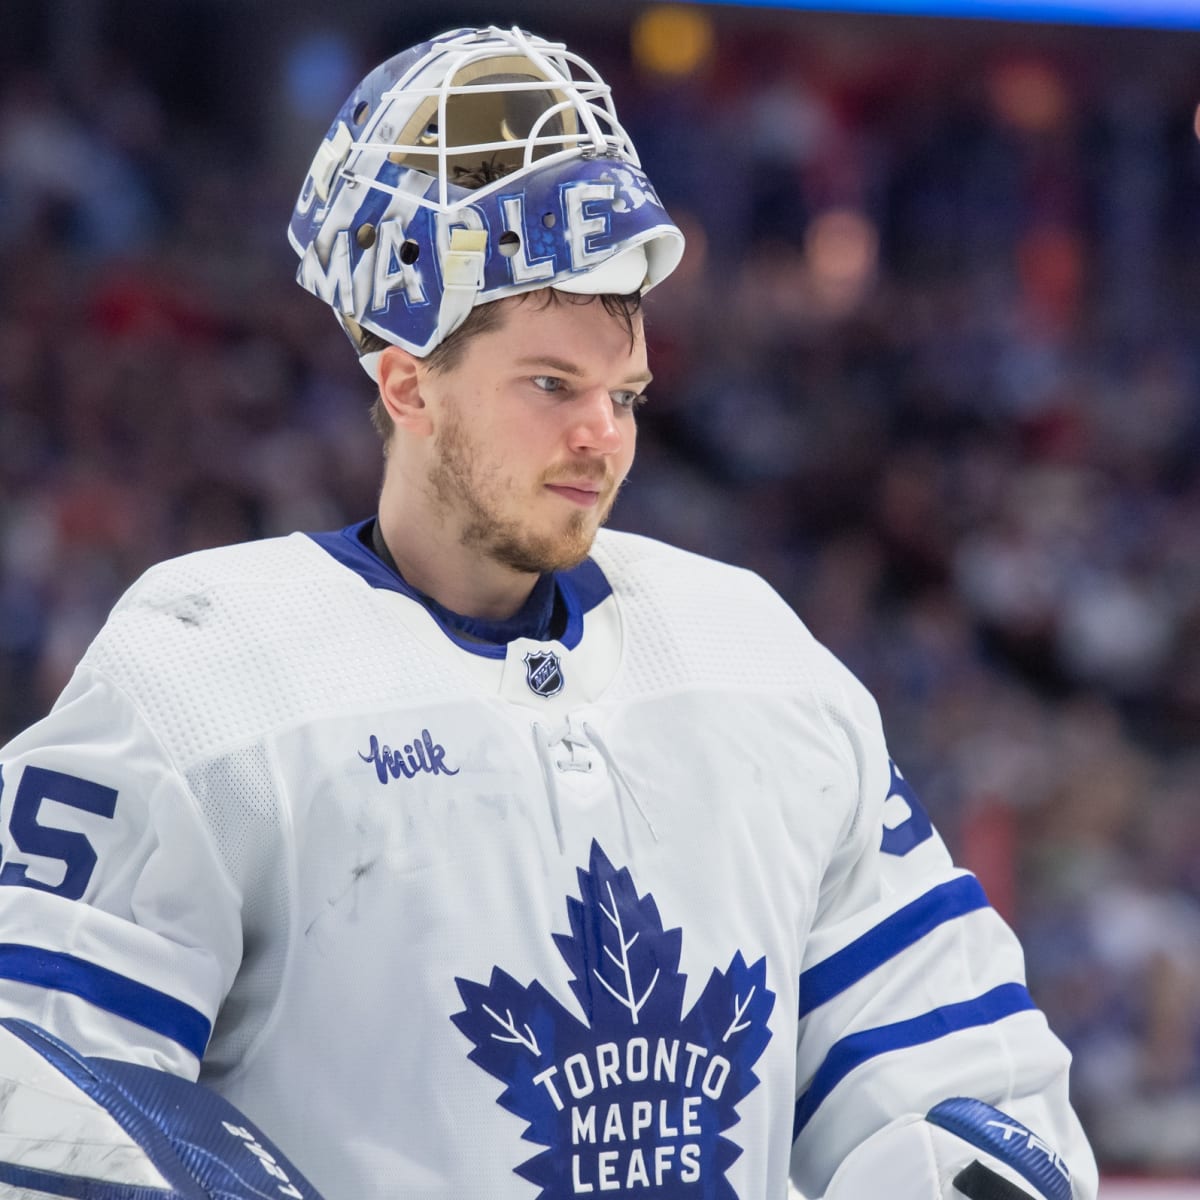 Ilya Samsonov opts out of wearing rainbow decal for Toronto Maple Leafs'  Pride Night